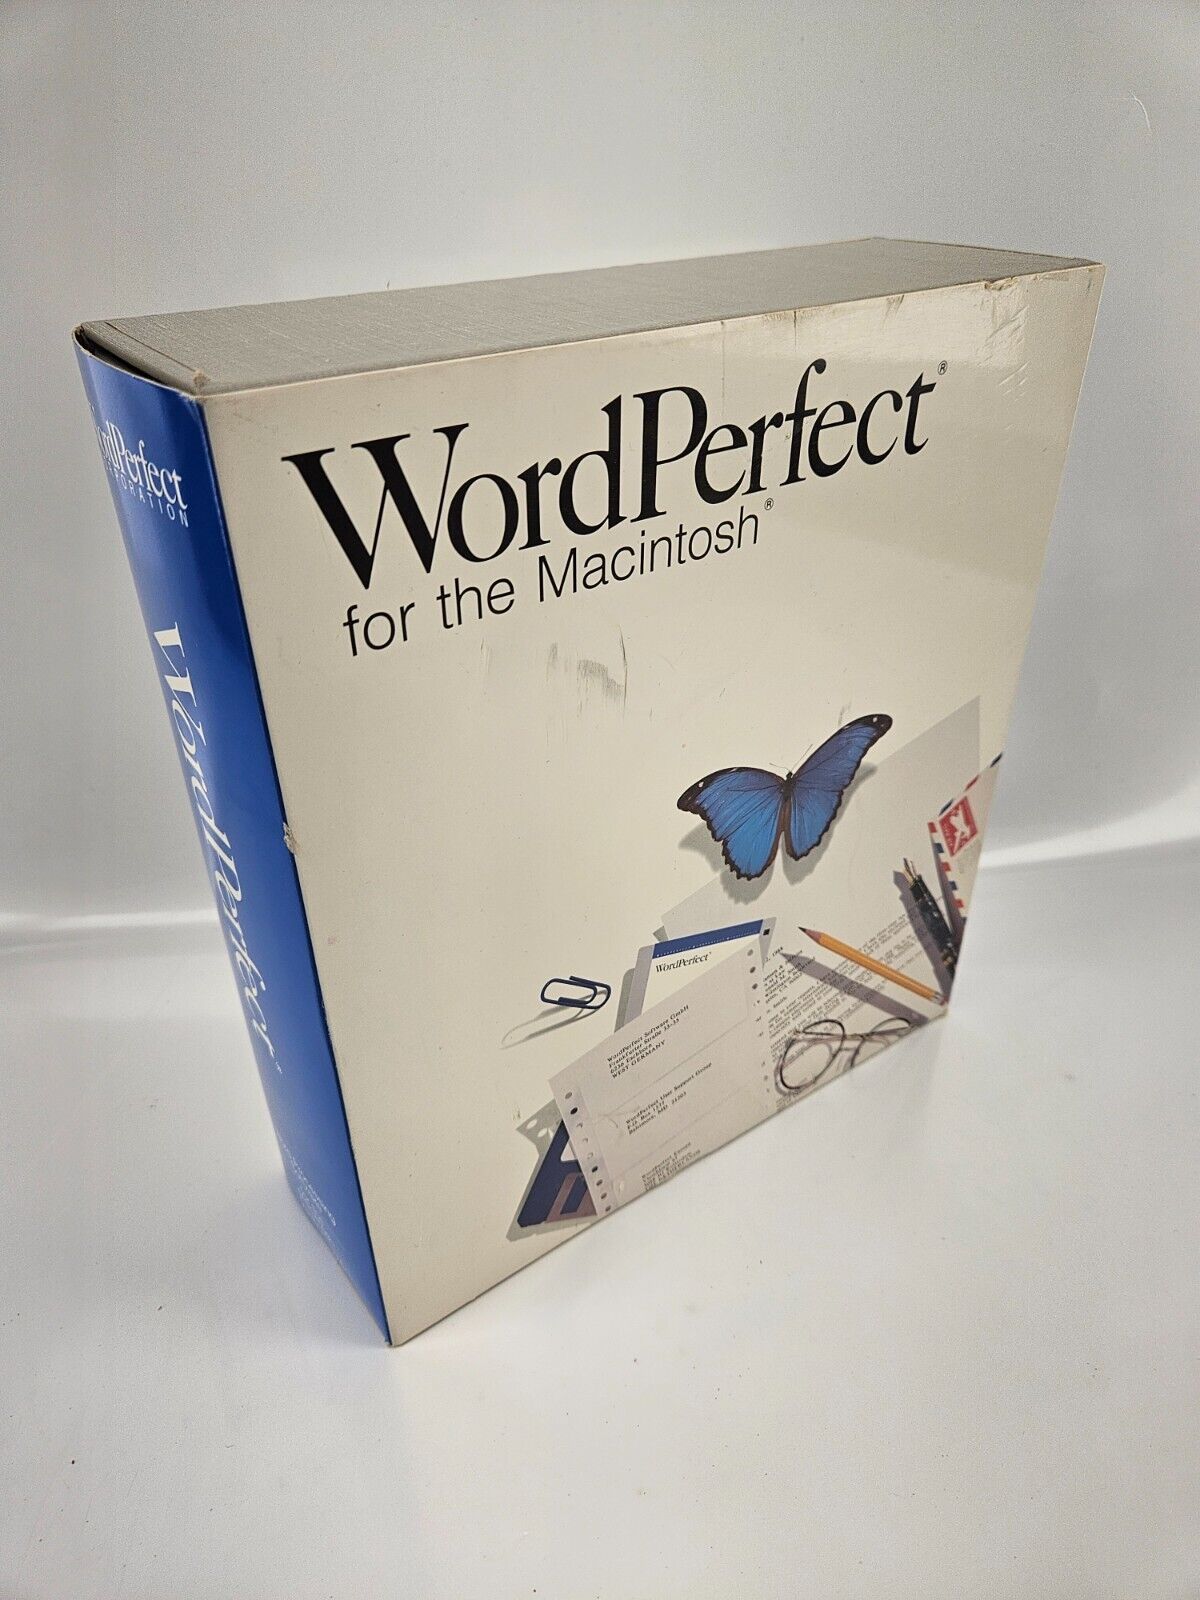 WordPerfect for the Macintosh Version 1.0.5 - Open Box New